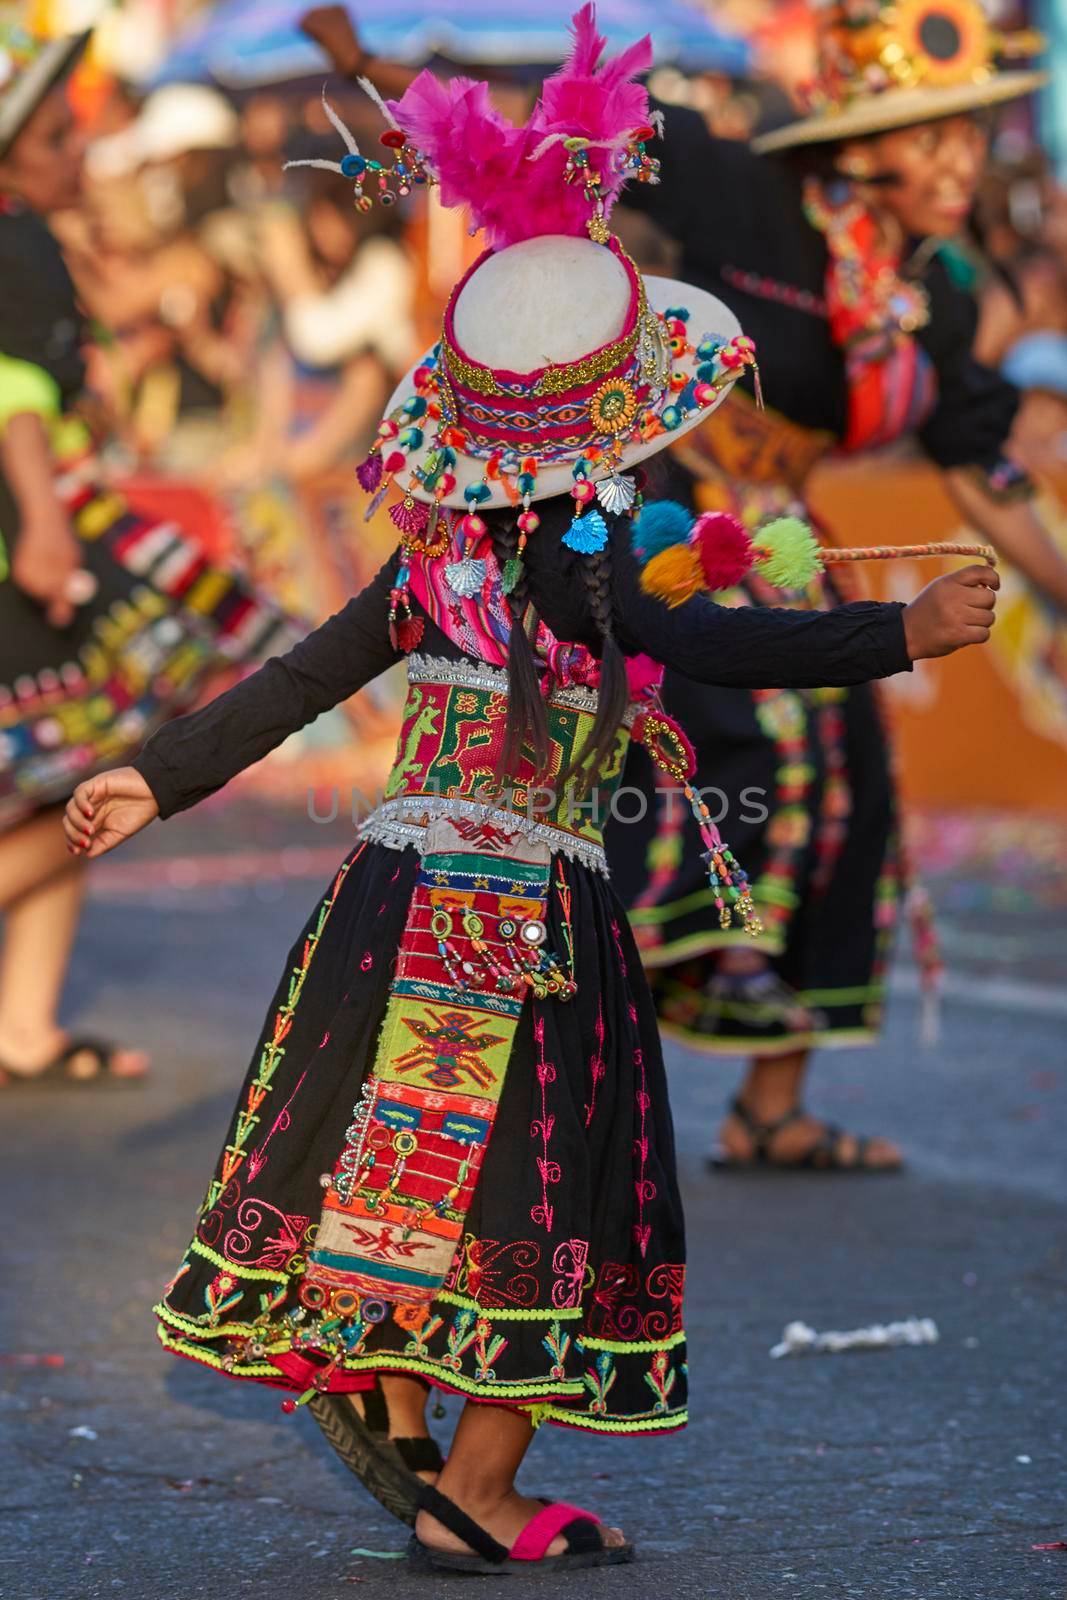 Tinkus dancers at the Arica Carnival by JeremyRichards